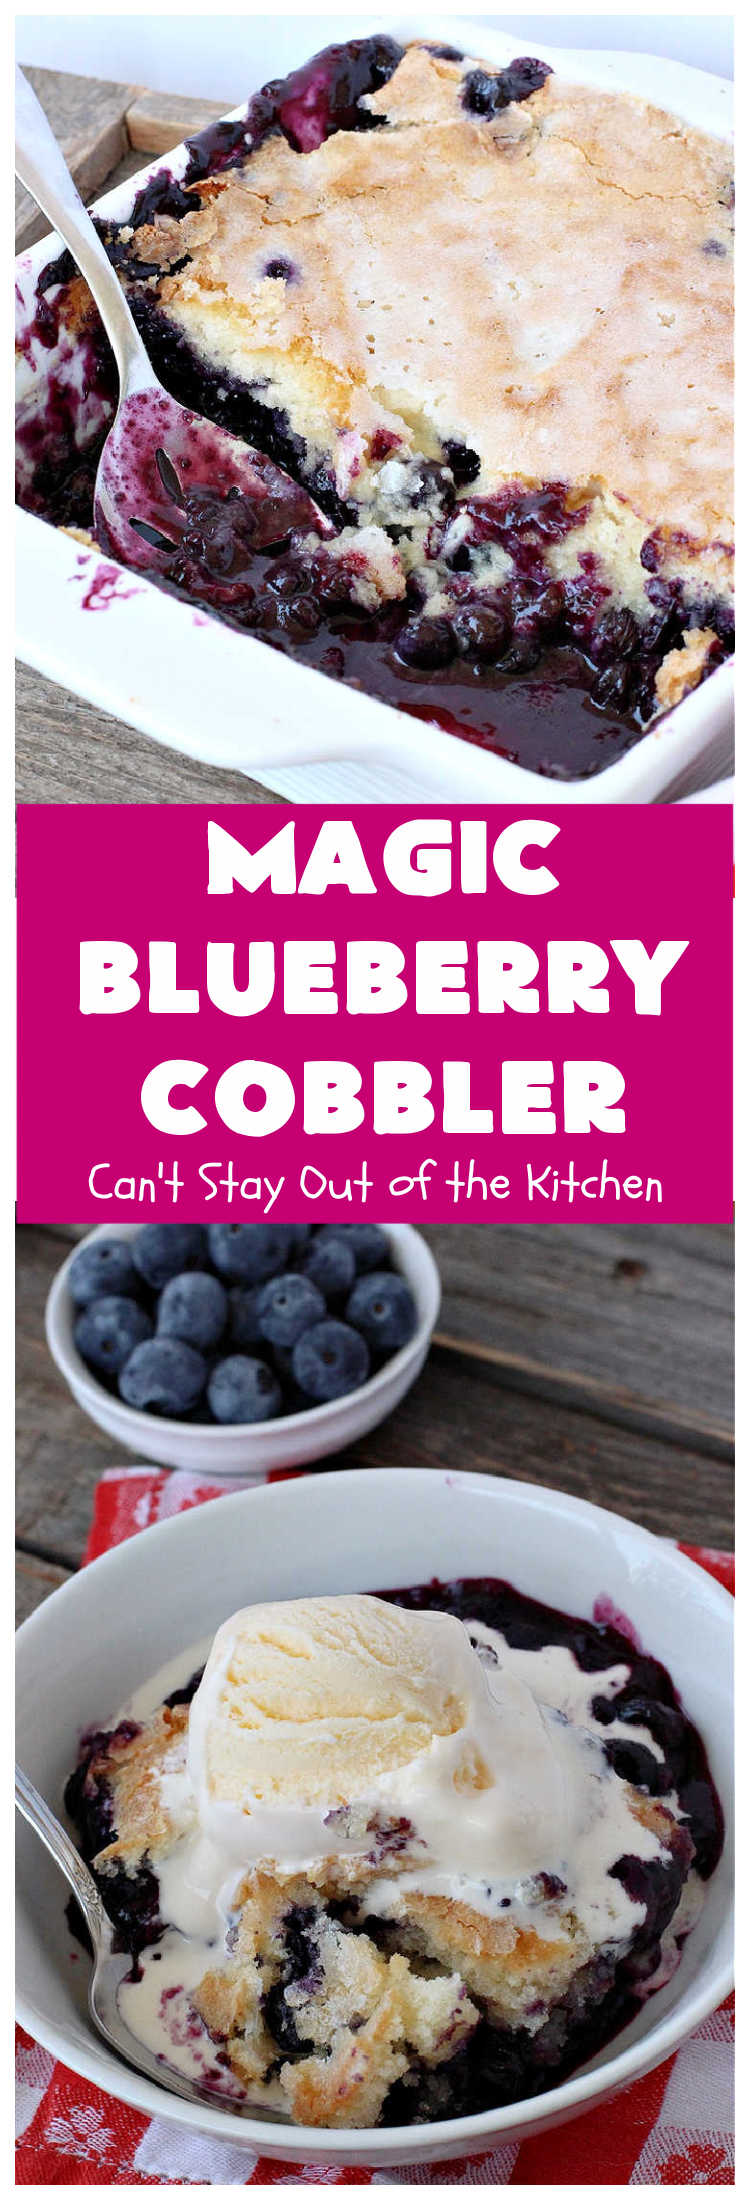 Magic Blueberry Cobbler | Can't Stay Out of the Kitchen  | this #cobbler really is magic! It's layered with fresh #blueberries, then a topping and finally it has a sugar glaze on top like glazed donuts! Perfect for a company or #holiday #dessert. #HolidayDessert #BlueberryCobbler #BlueberryDessert #MagicBlueberryCobbler